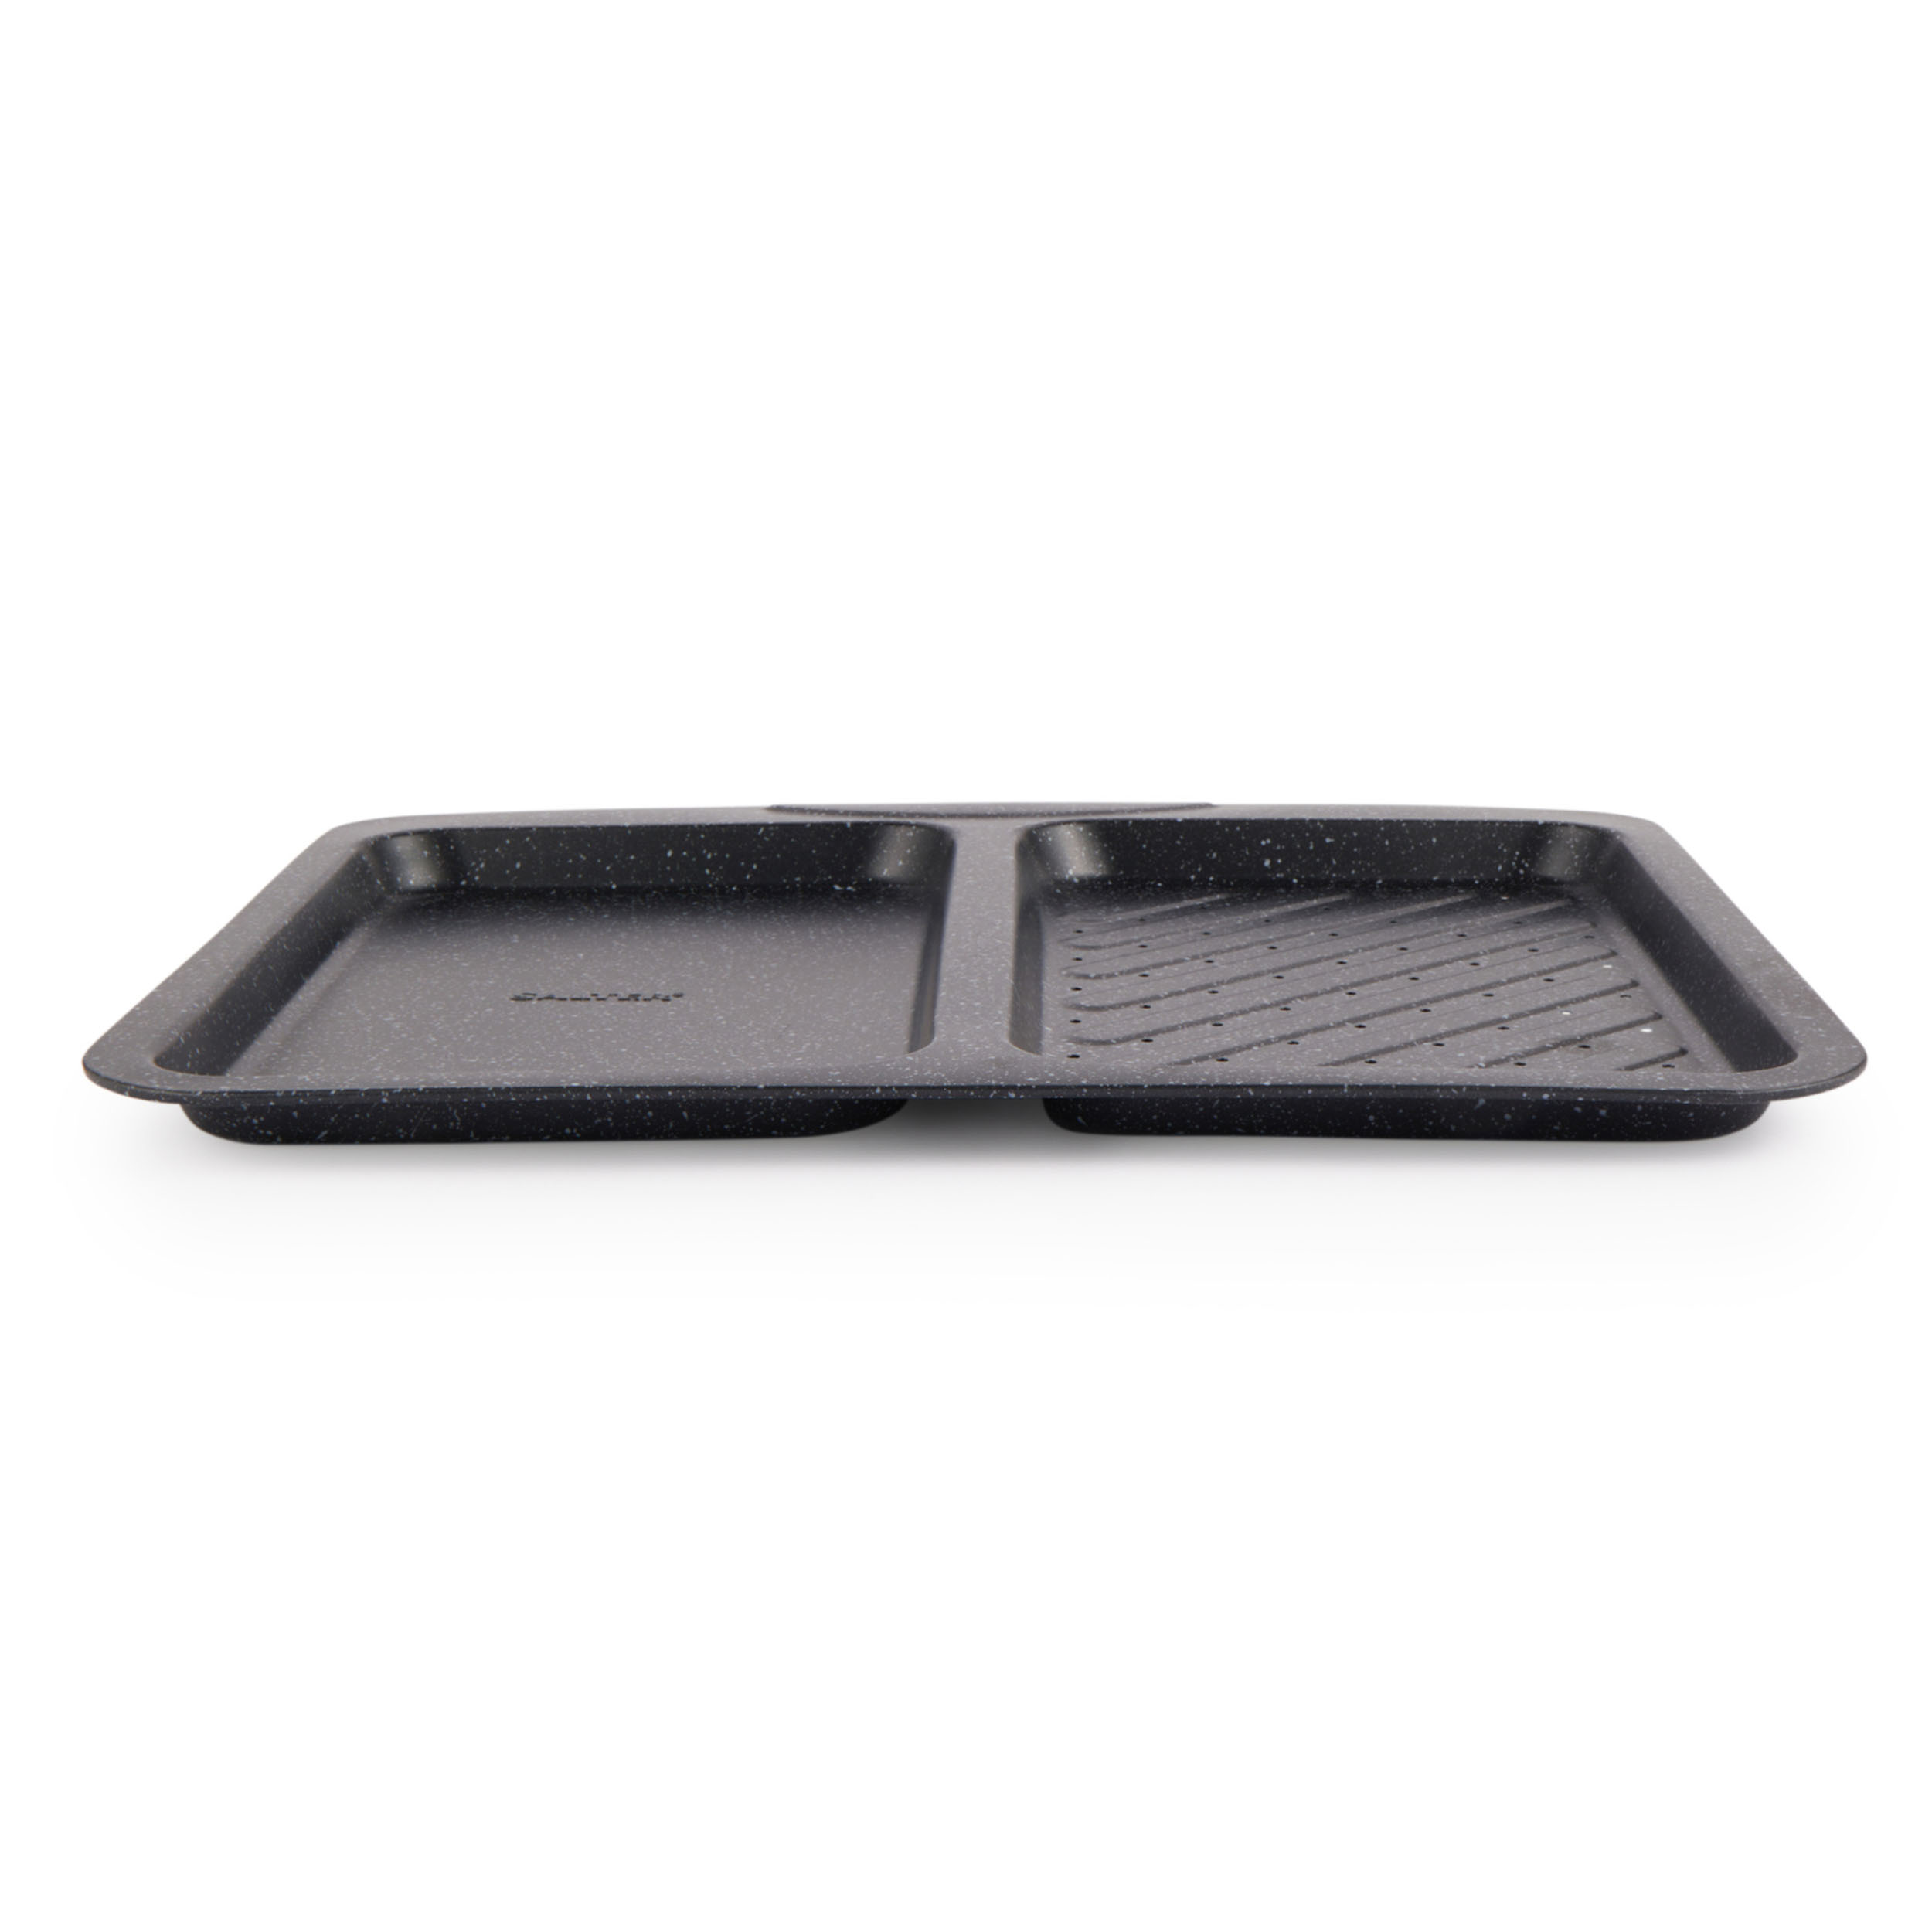 Versatile Divided Nut Serving Baking Trays Wilko With Compartments